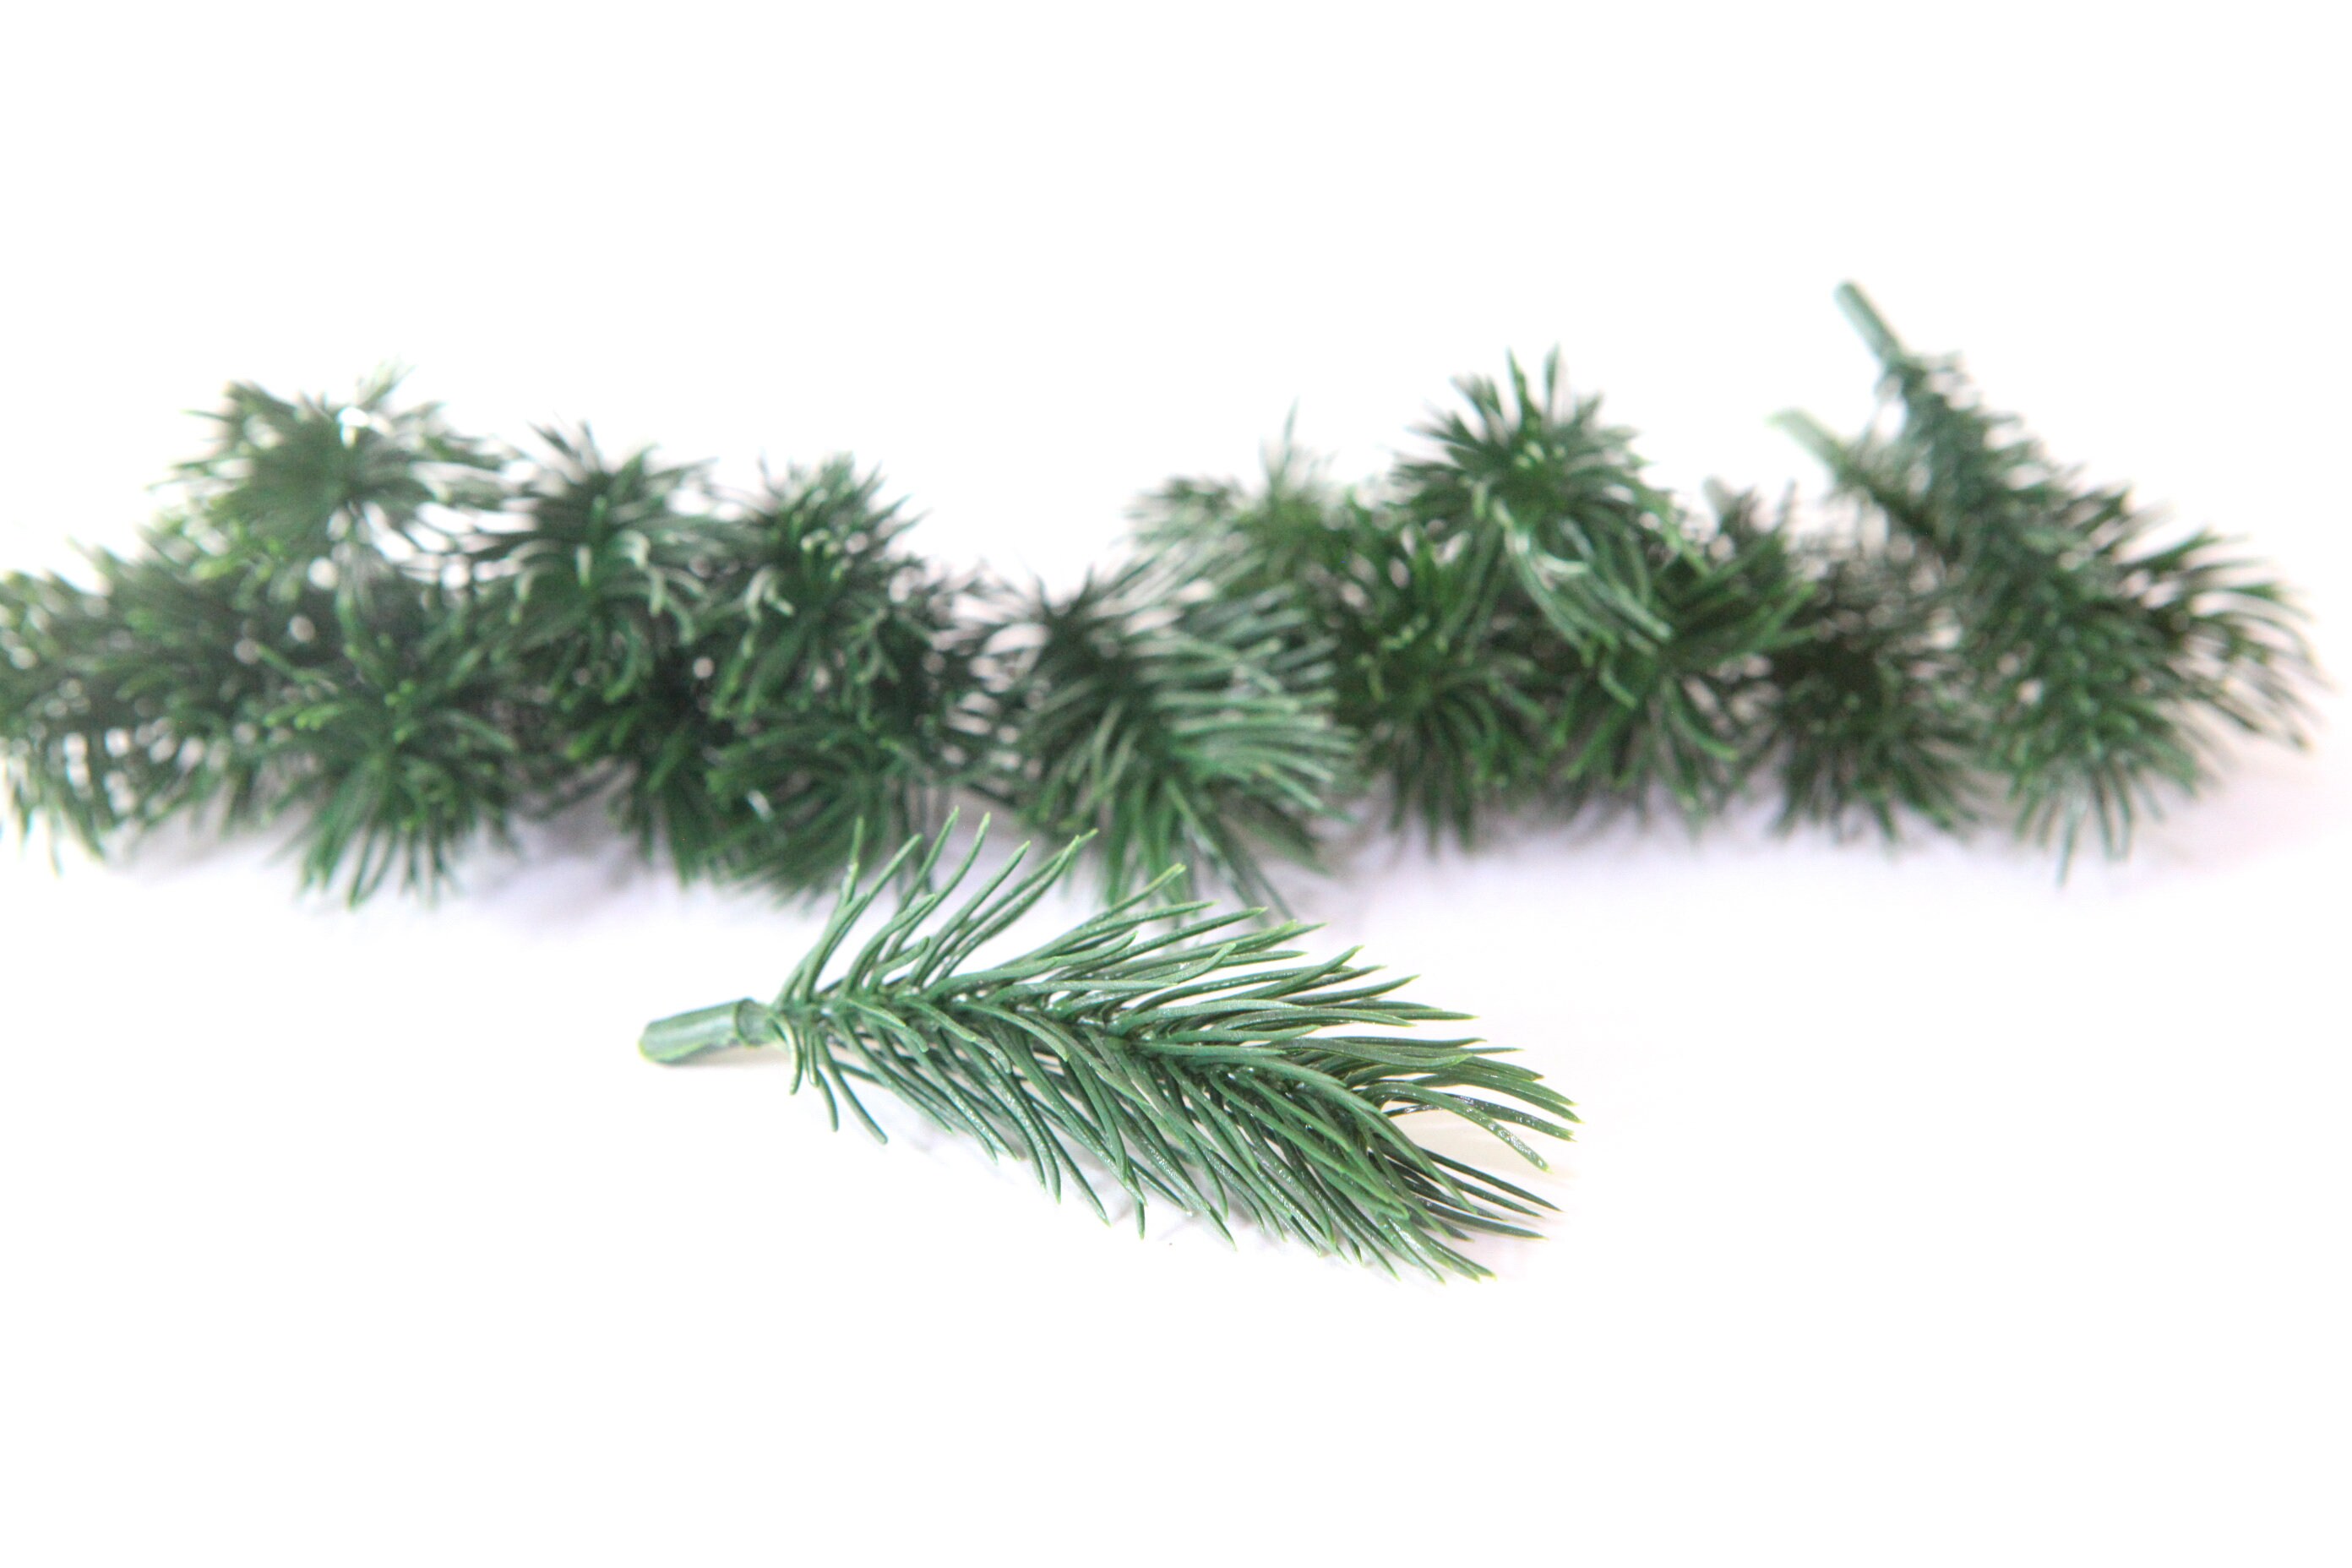 3 Loblolly Pine Branches With Pine Needle Bundles 